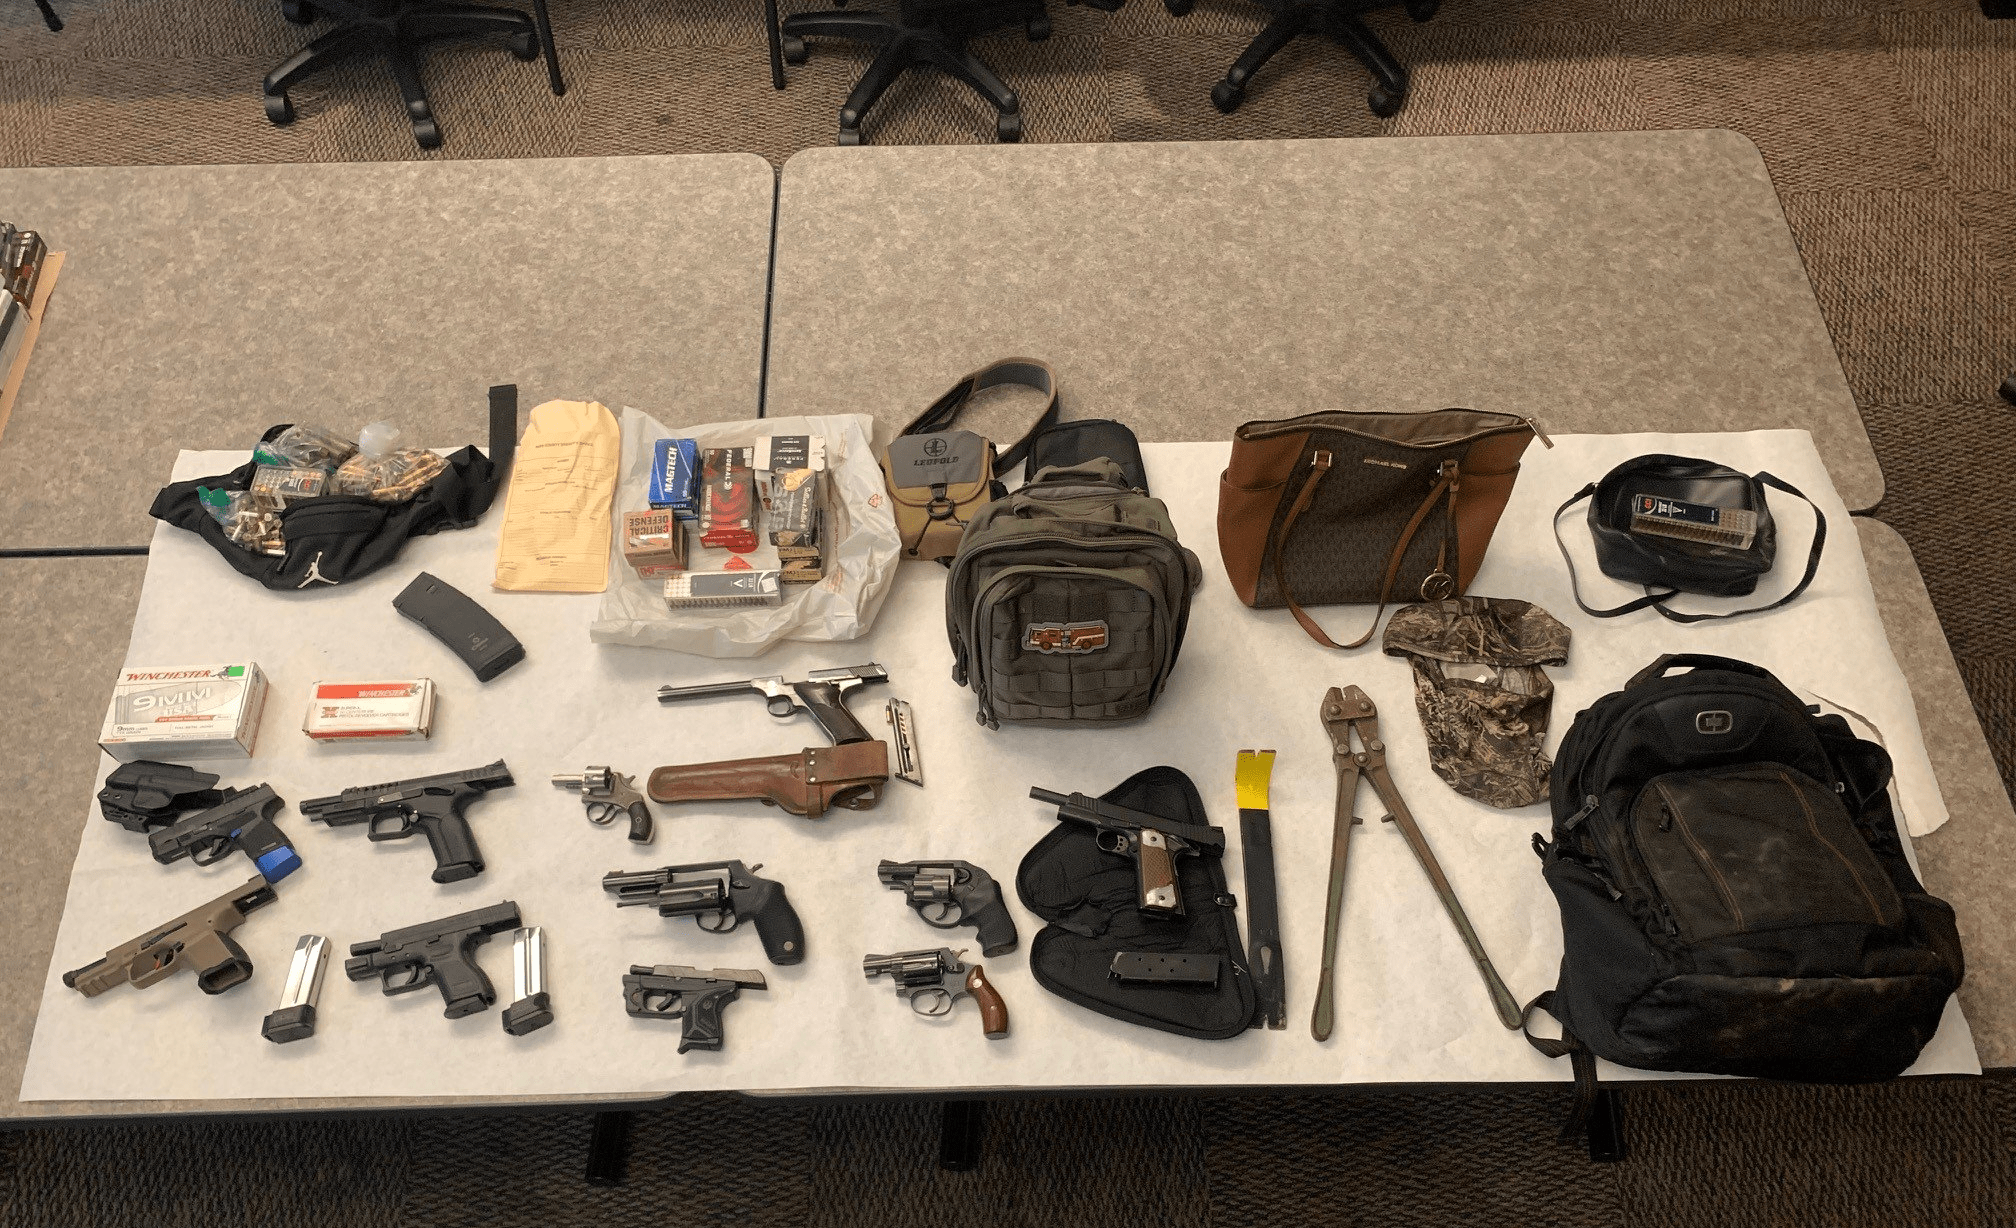 items-confiscated-from-enrique-quiros-ortiz-napa-sheriff